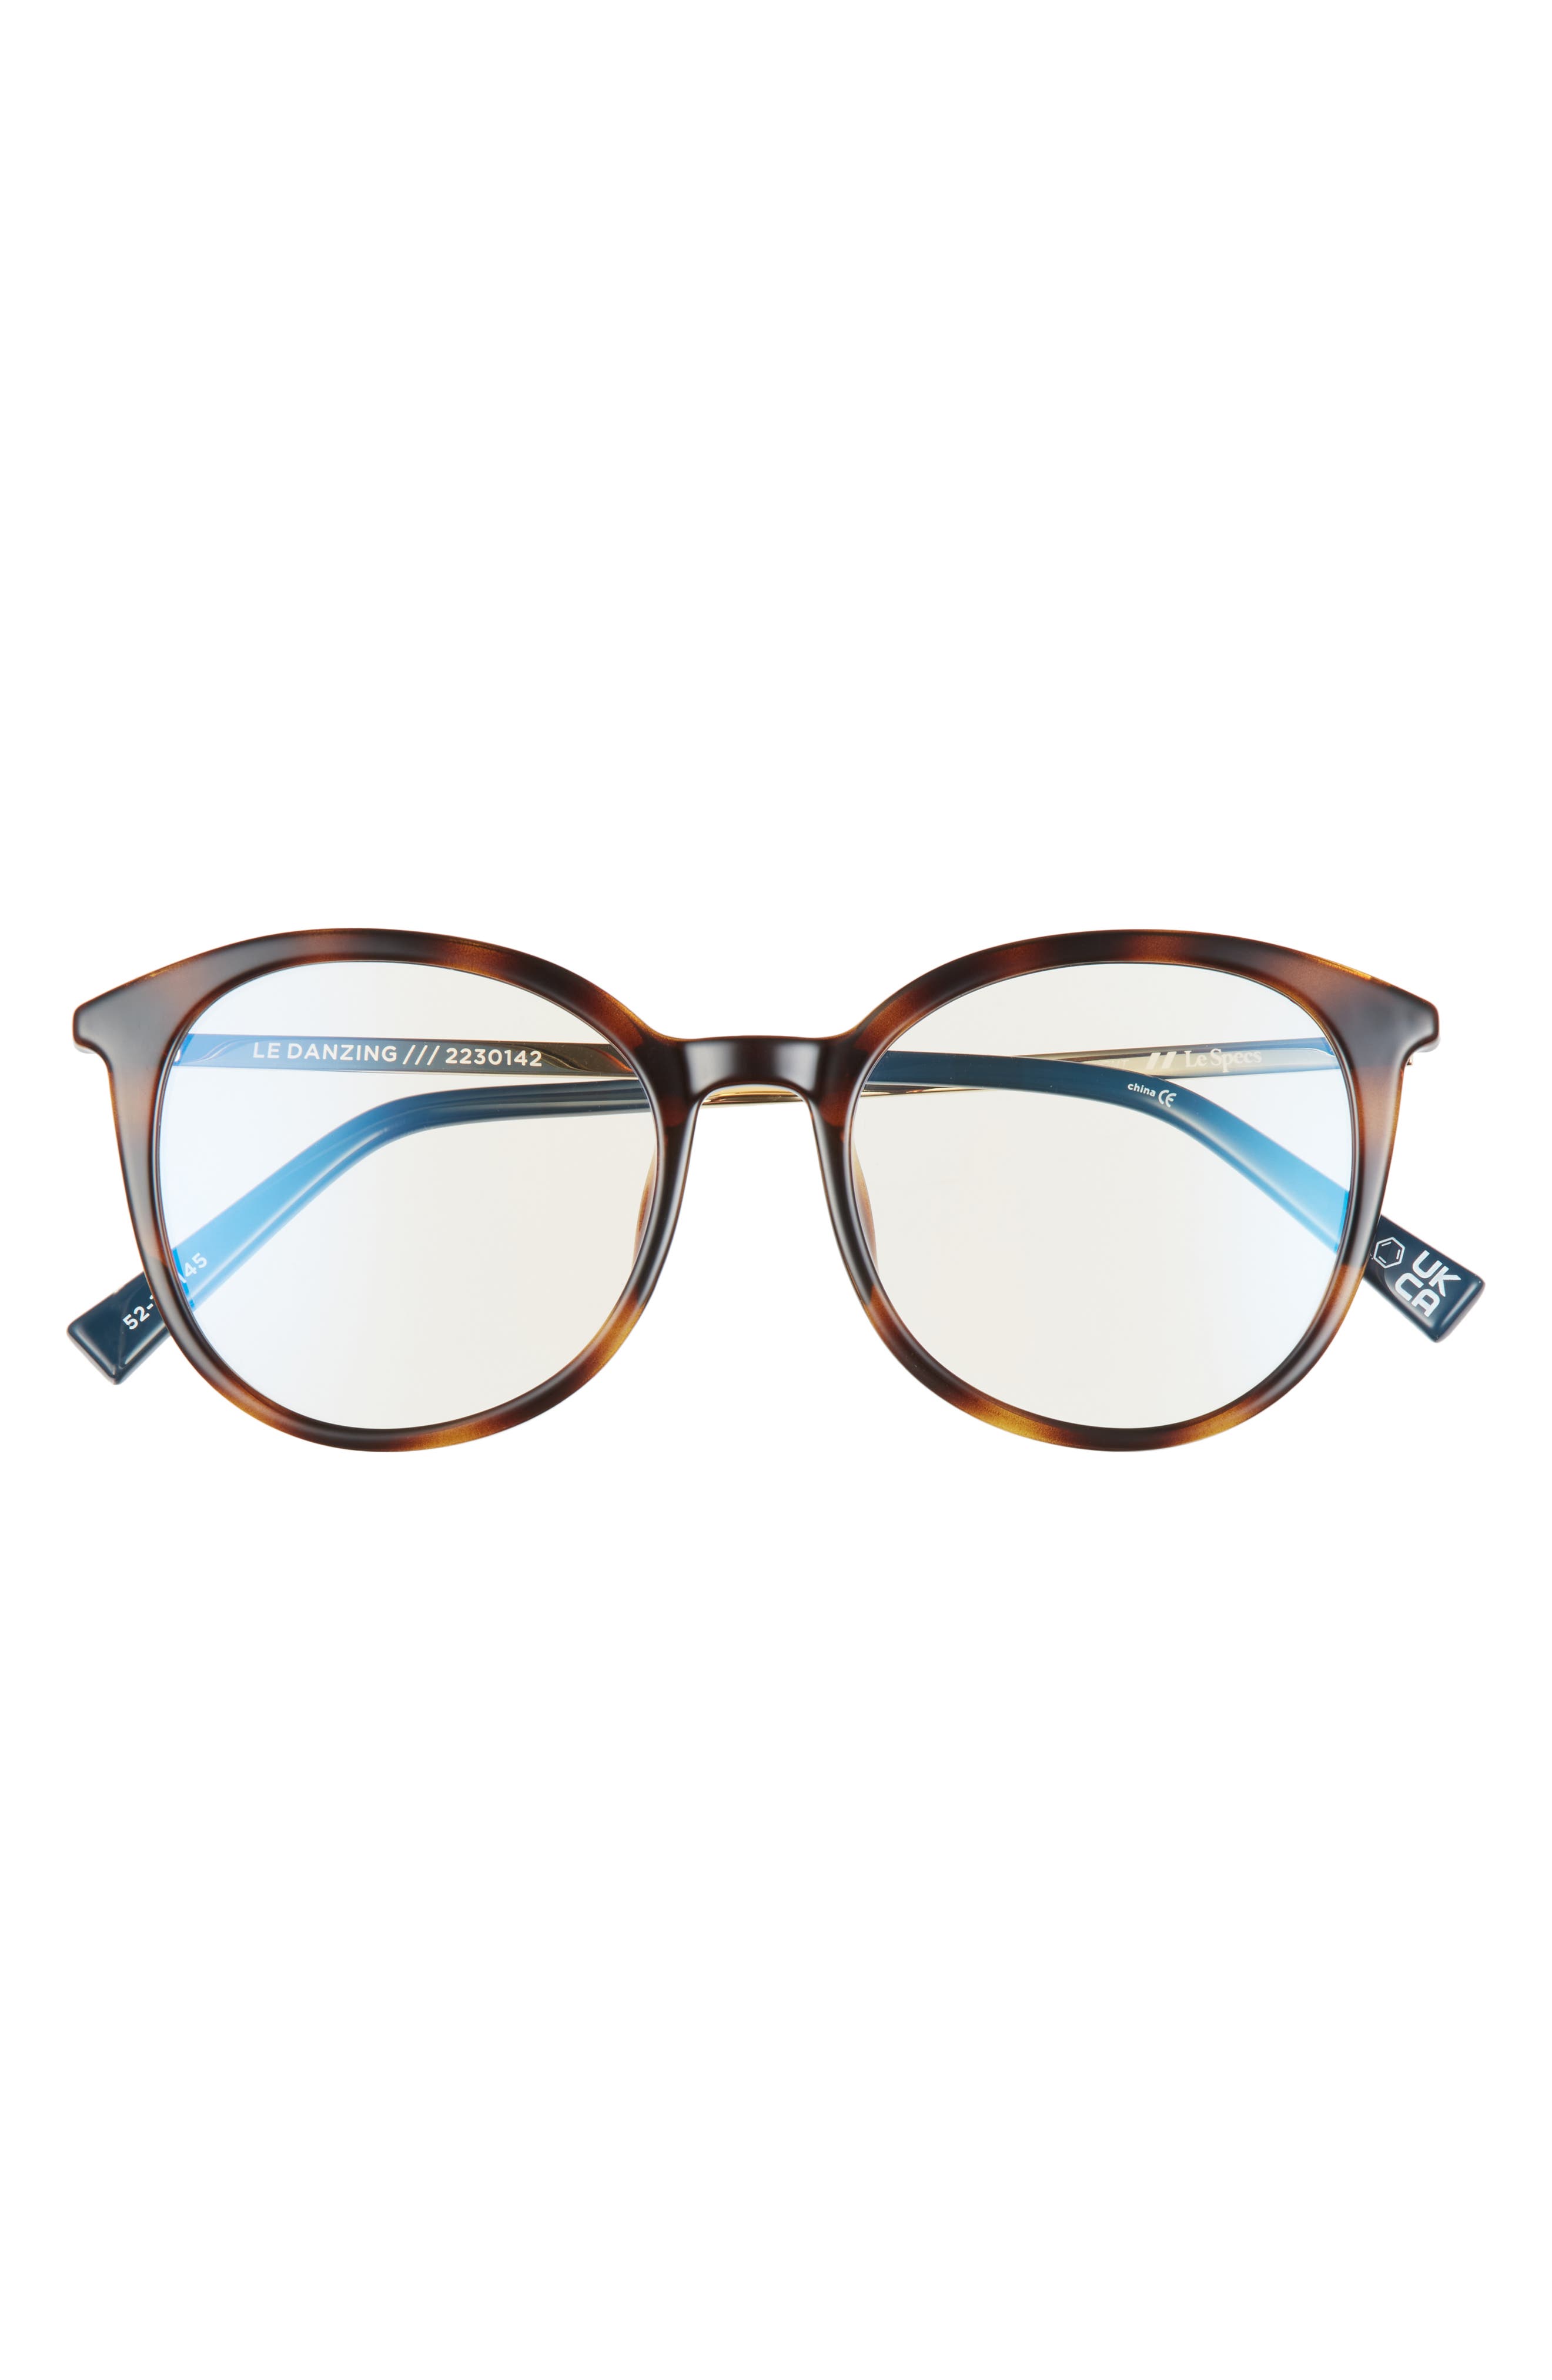 Le Specs Le Danzing 52mm Round Blue Light Blocking Glasses in Tort/Gold/Anti Blue Light at Nordstrom